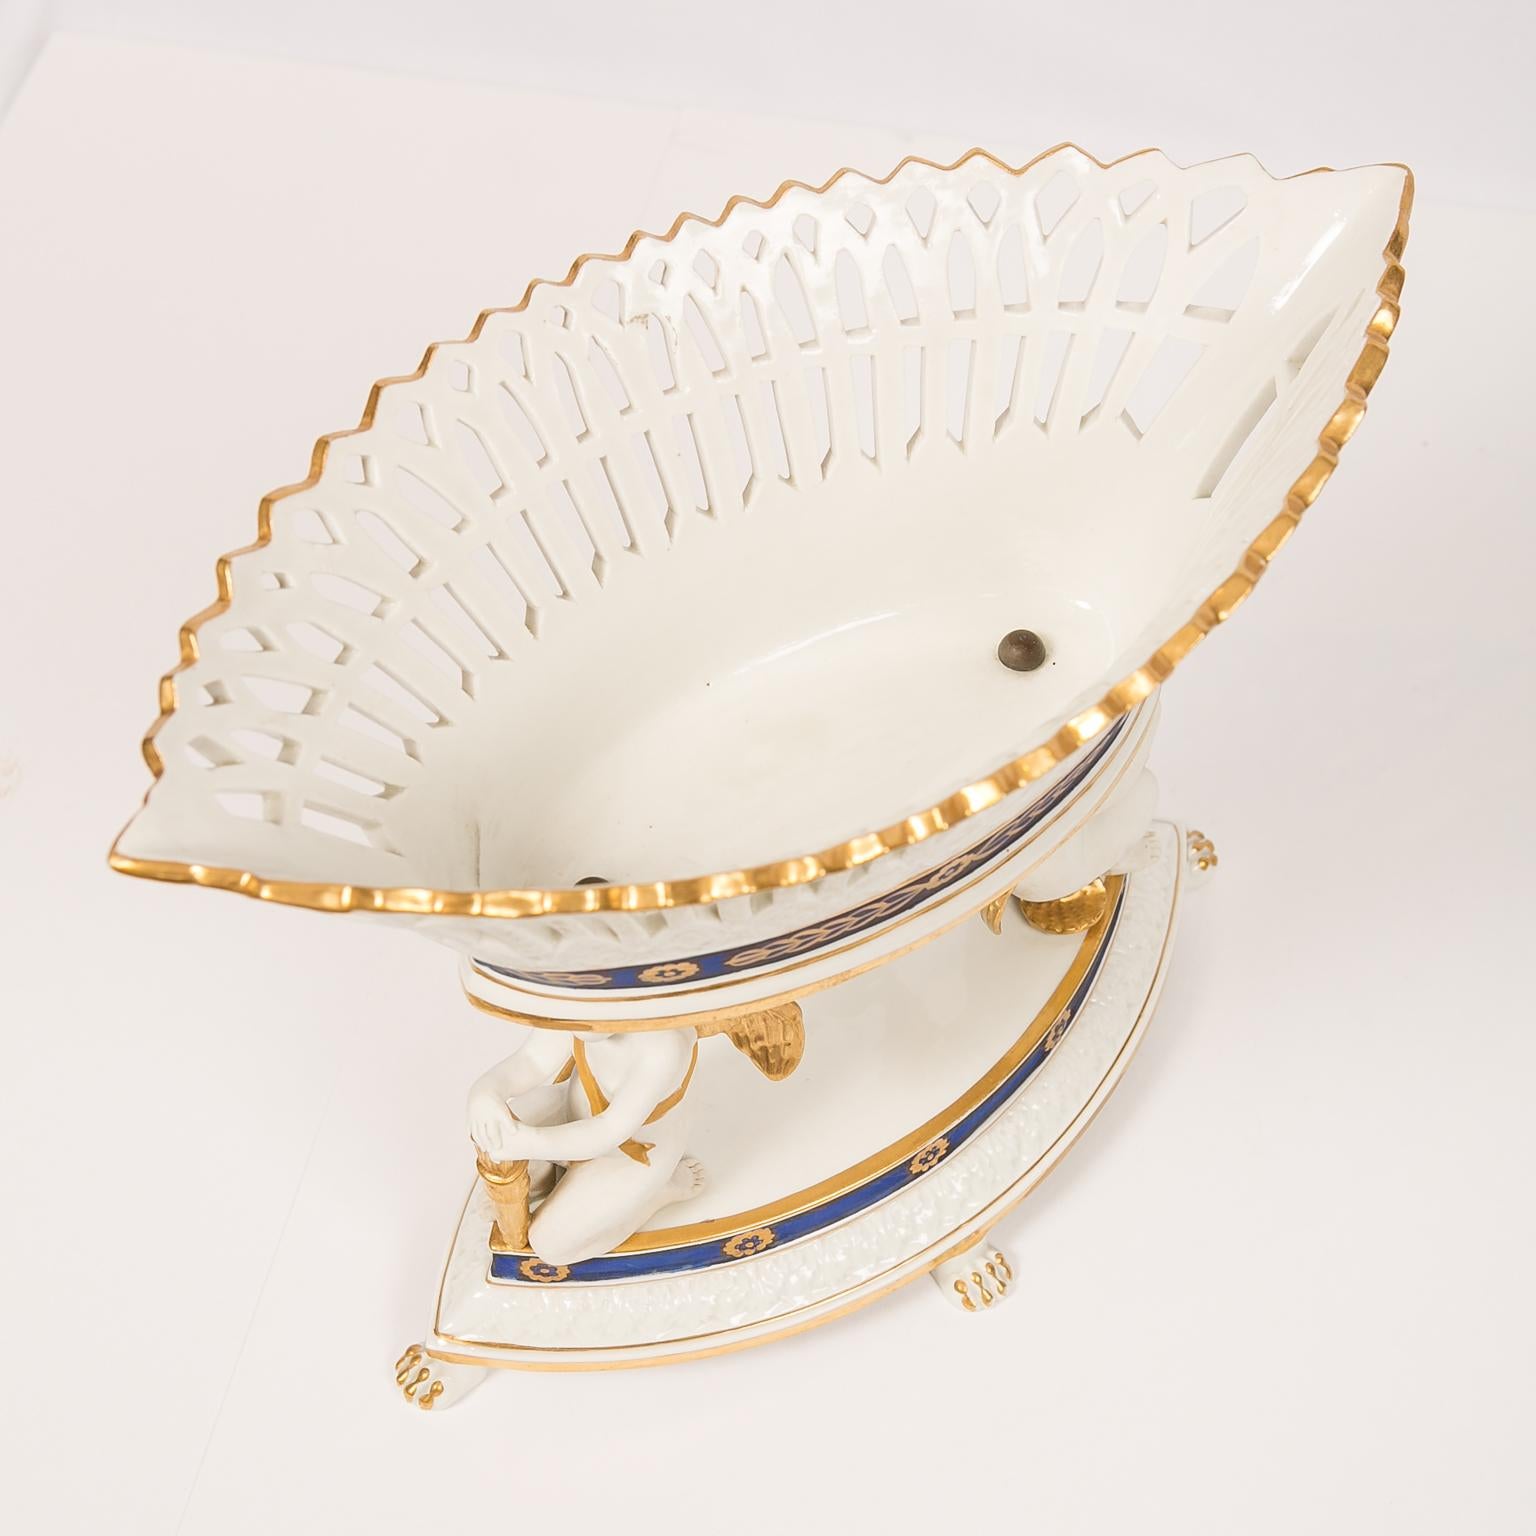 Antique French Porcelain Centerpiece Made by Samson et Cie. Late 19th Century 4